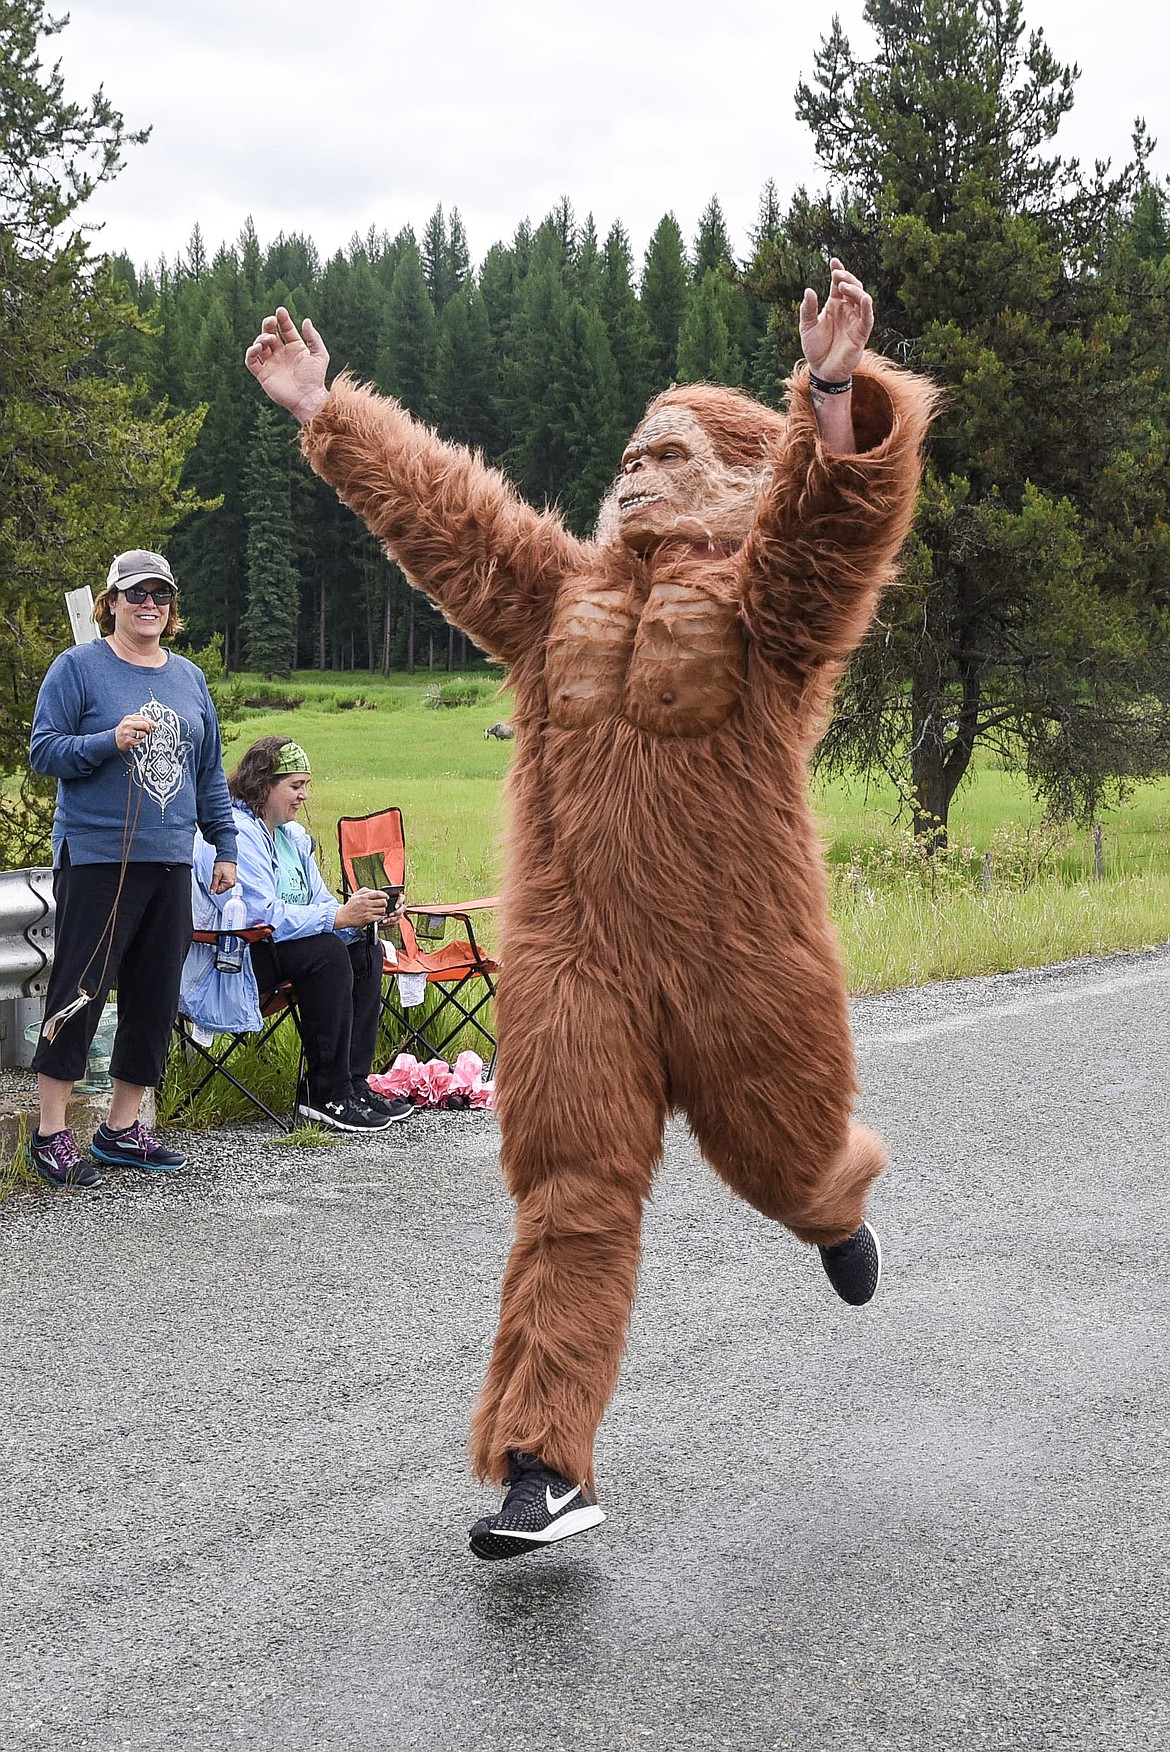 Sasquatch does a little celebration, finishing in 26:31, during the 2019 Sasquatch Run at the annual Yaak Sasquatch Festival, Saturday. (Ben Kibbey/The Western News)